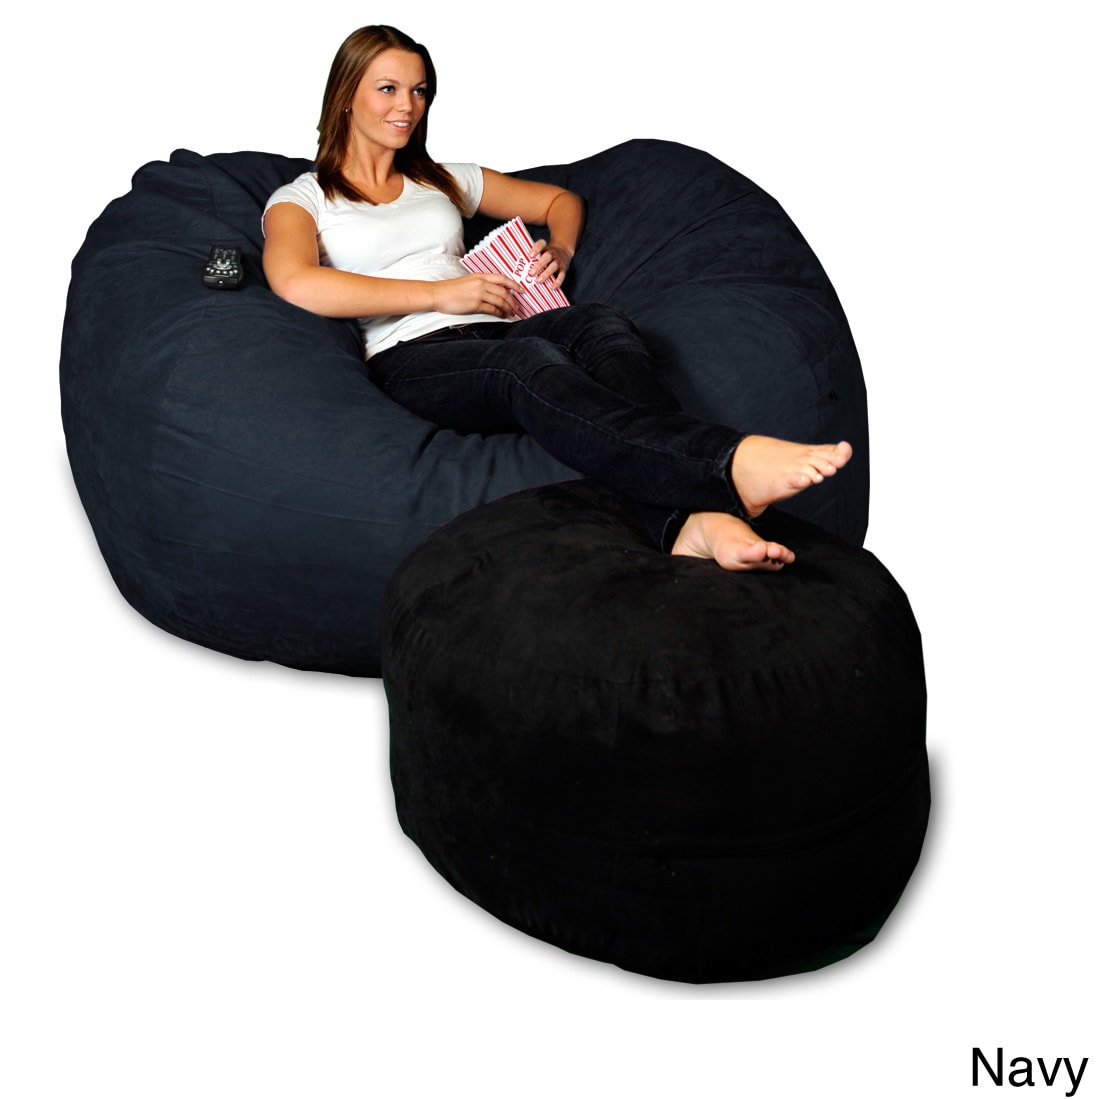 Theater Sacks Llc Soft Micro Suede 5 foot Beanbag Chair Lounger Blue Size Large